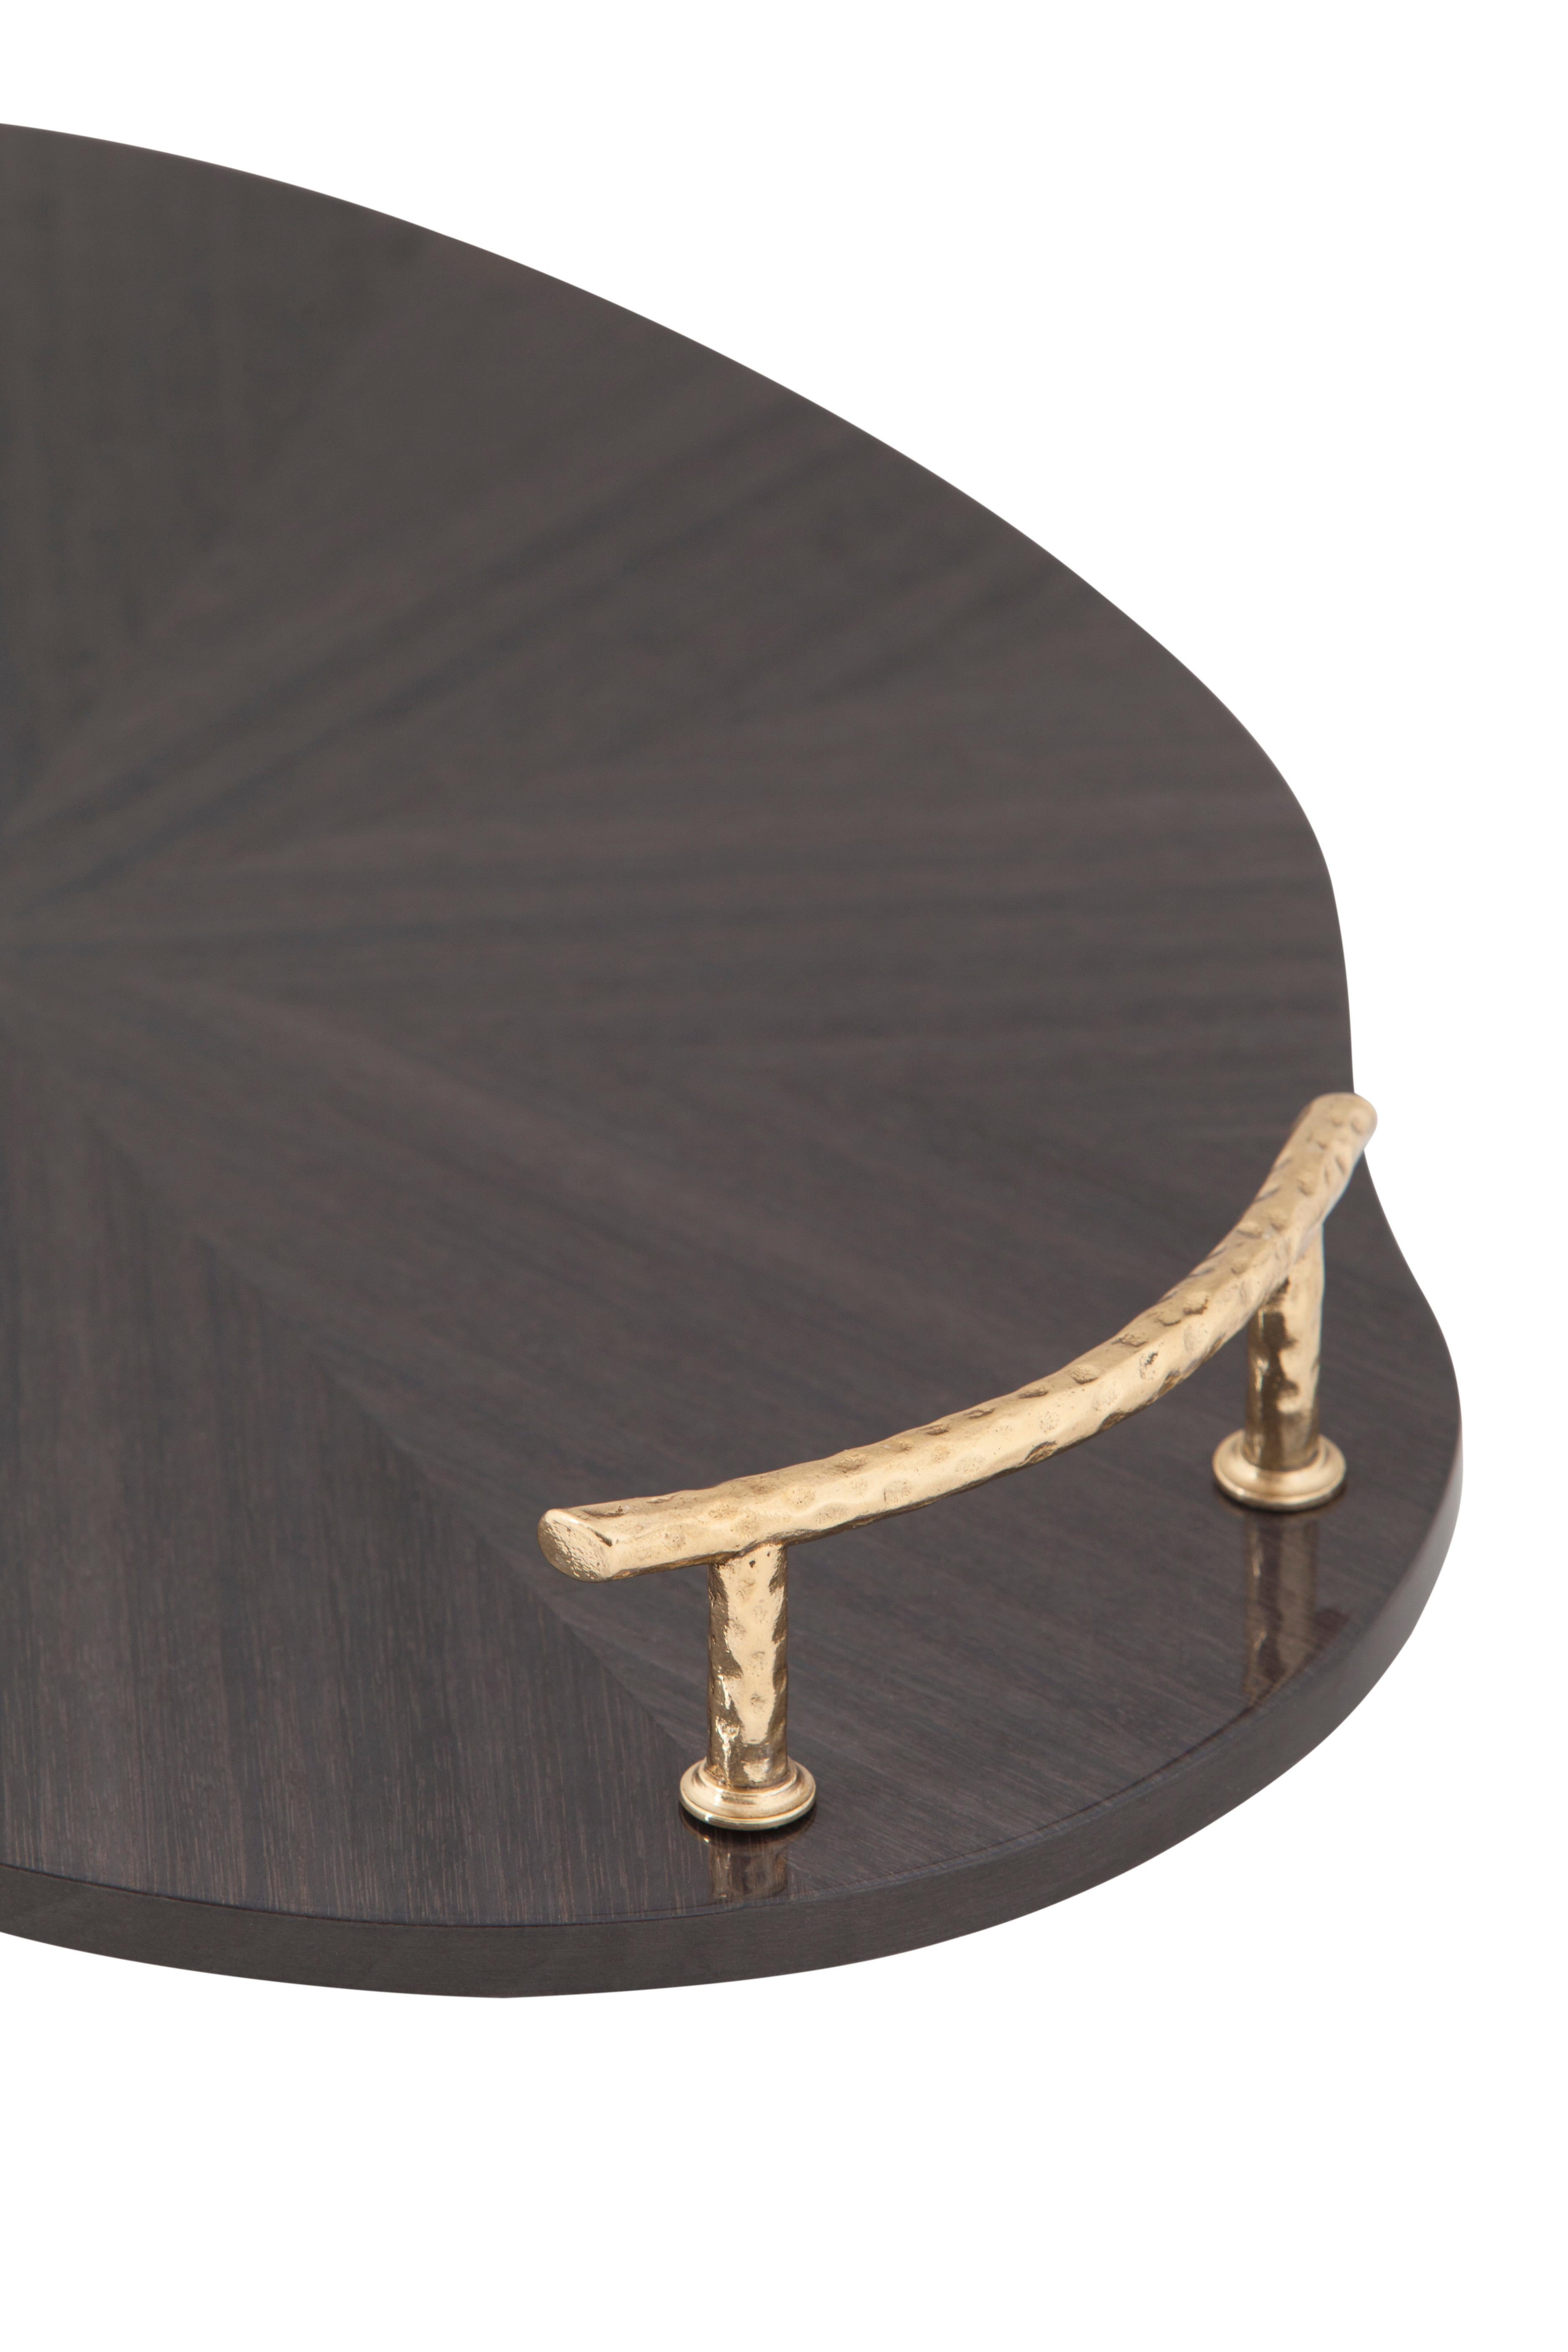 Serving Tray Sakai, Lusitanus Home Collection, Handcrafted in Portugal - Europe by Lusitanus Home.

Handcrafted with precision and care, the Sakai serving tray presents the art of marquetry in its most refined form, where high-quality wood veneers